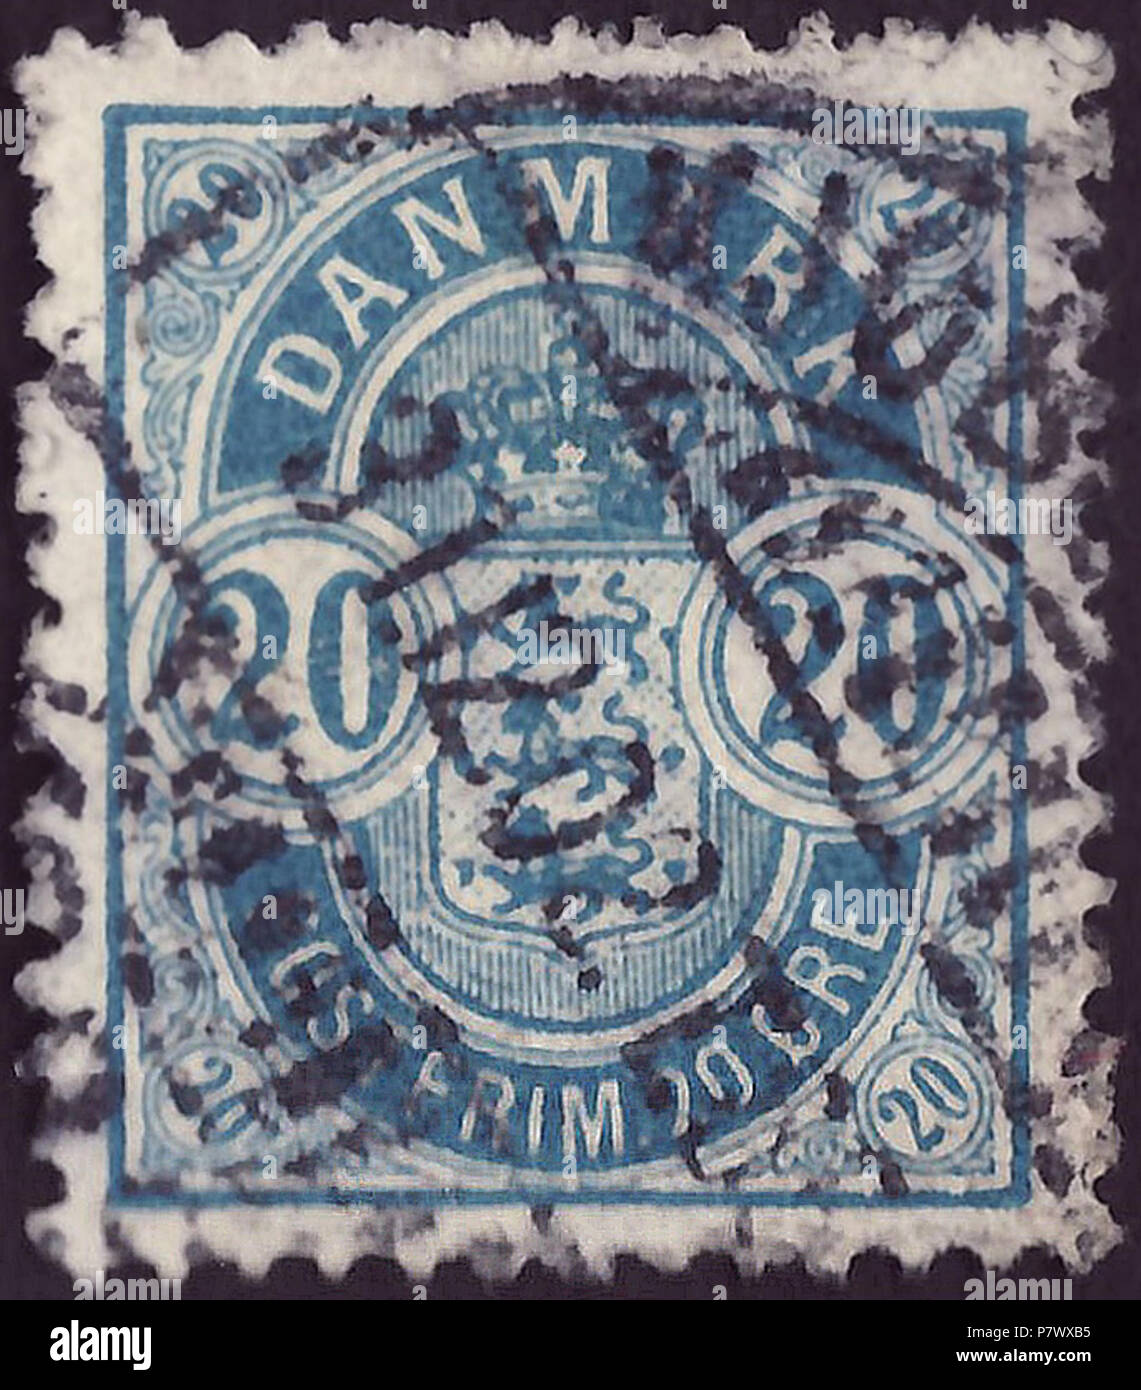 Stamp of the Kingdom of Denmark; 1895; definitive stamp of the issue 'Coat of arms in standing oval with numerals'; new drawing format with perforation spacing; special characteristics: (a) Larger numerals in the corners as in the original issue from 1882; (b) perforation 12¾; c) watermark Denmark No. 2 (Michel: 1Y) (large crown) (d) Longer and more slim legs in the letter 'M' in 'DENMARK' than variant with small numerals in the corner (1882); stamp postmarked in Copenhagen, 1902 Stamp: Michel: No. 36YB; Yvert et Tellier: No. 37a; AFA: No. 36B Color: blue Watermark: Denmark No. 2 (Michel: No.  Stock Photo